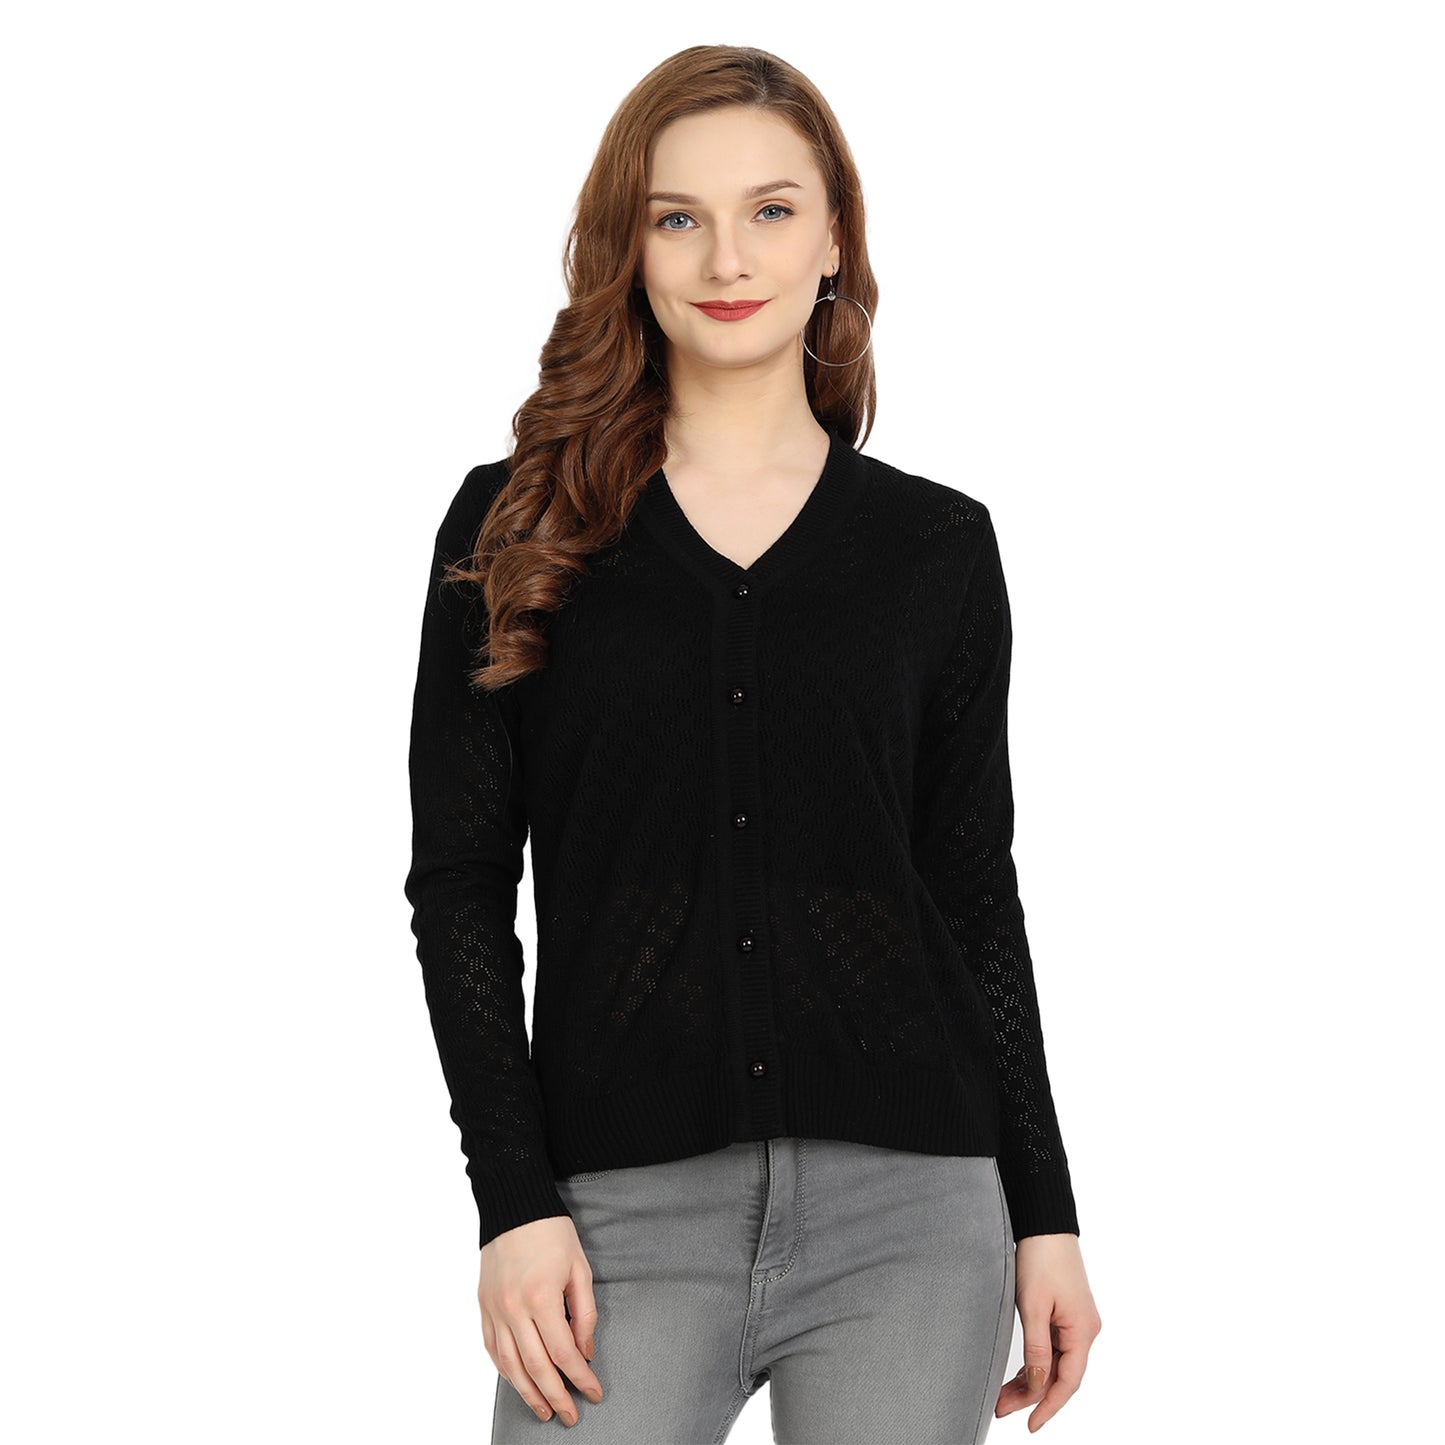 Clapton Acrylic Blend V Neck Full Sleeve Casual Solid Winter Wear Cardigans For Women Black